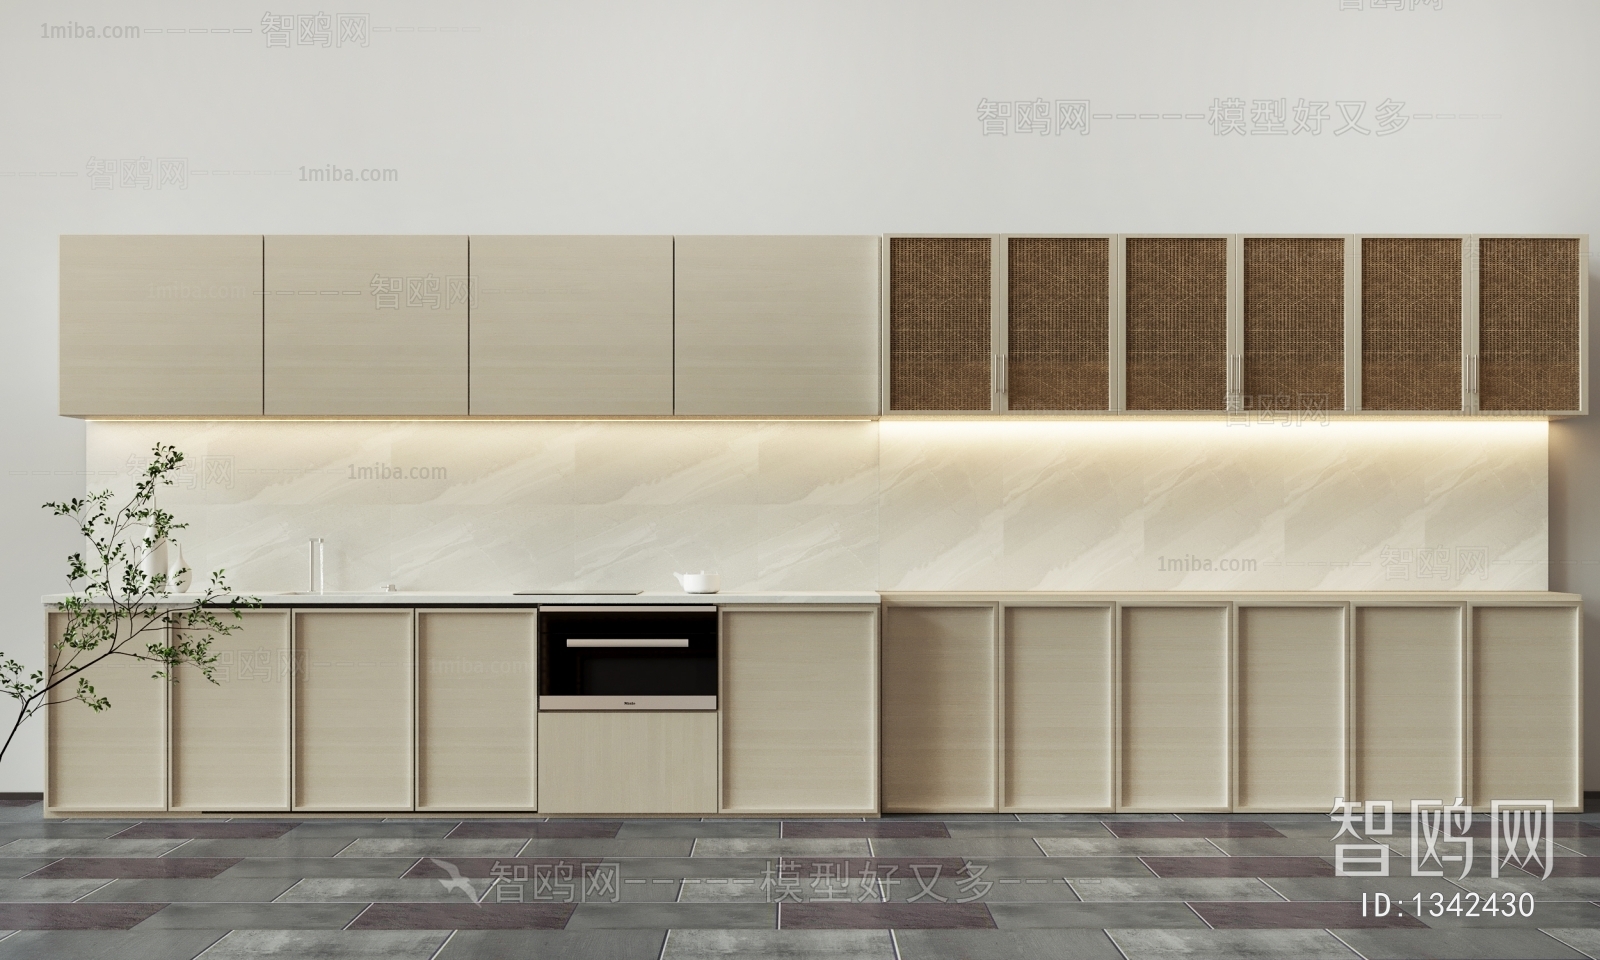 Nordic Style Kitchen Cabinet